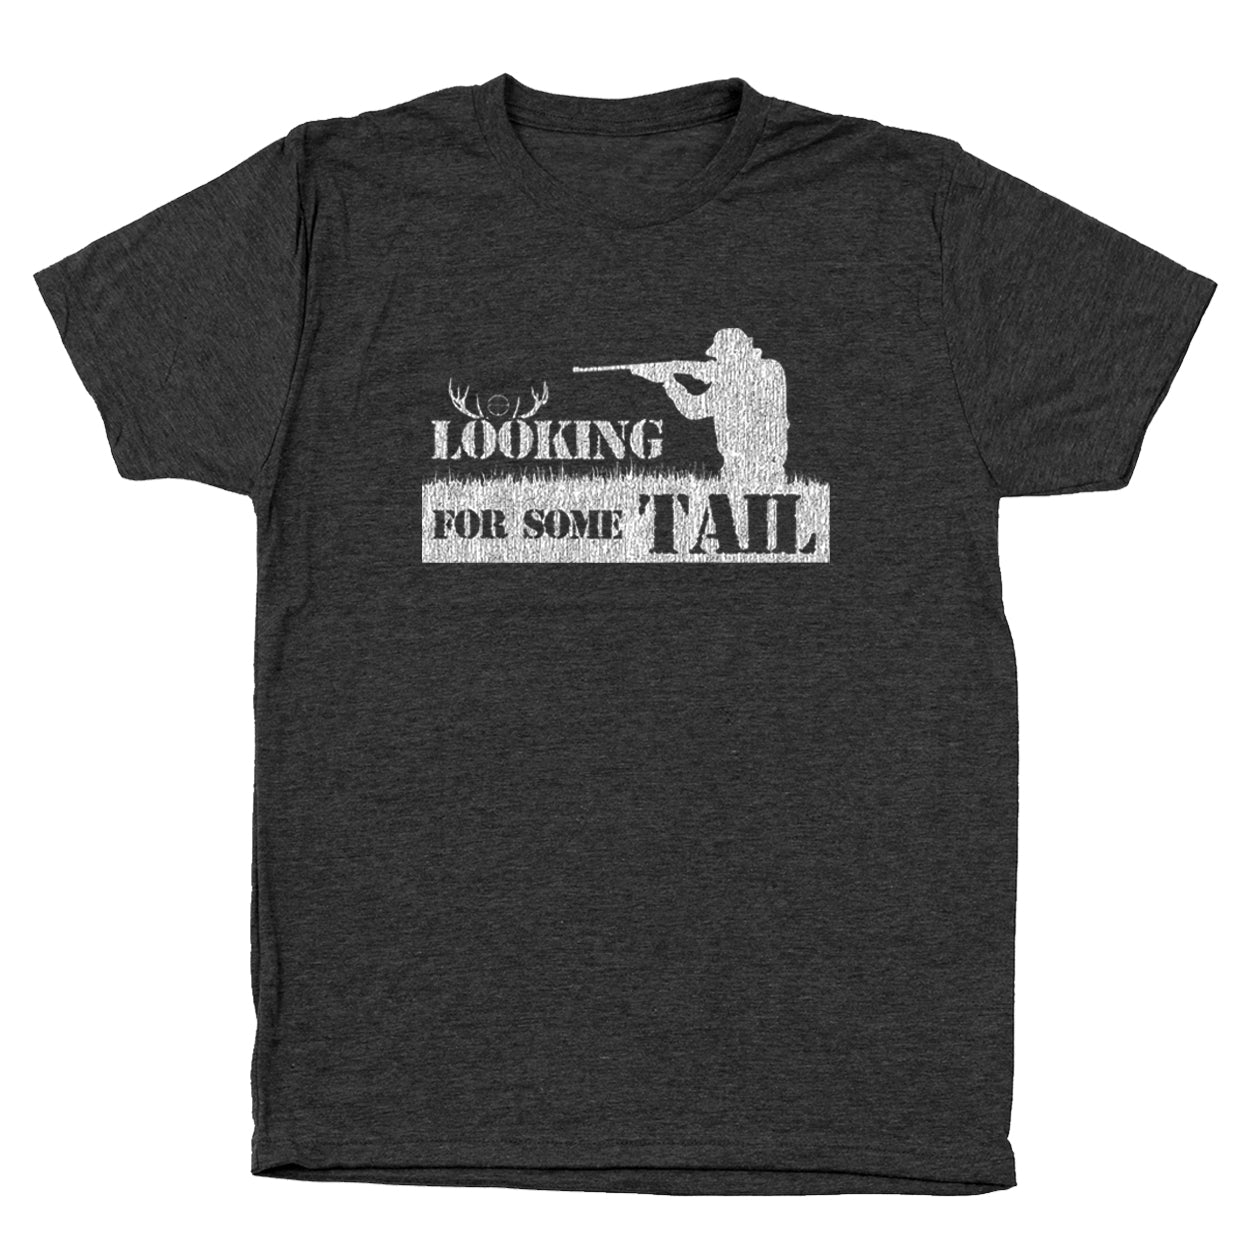 Looking For Some Tail Tshirt - Donkey Tees